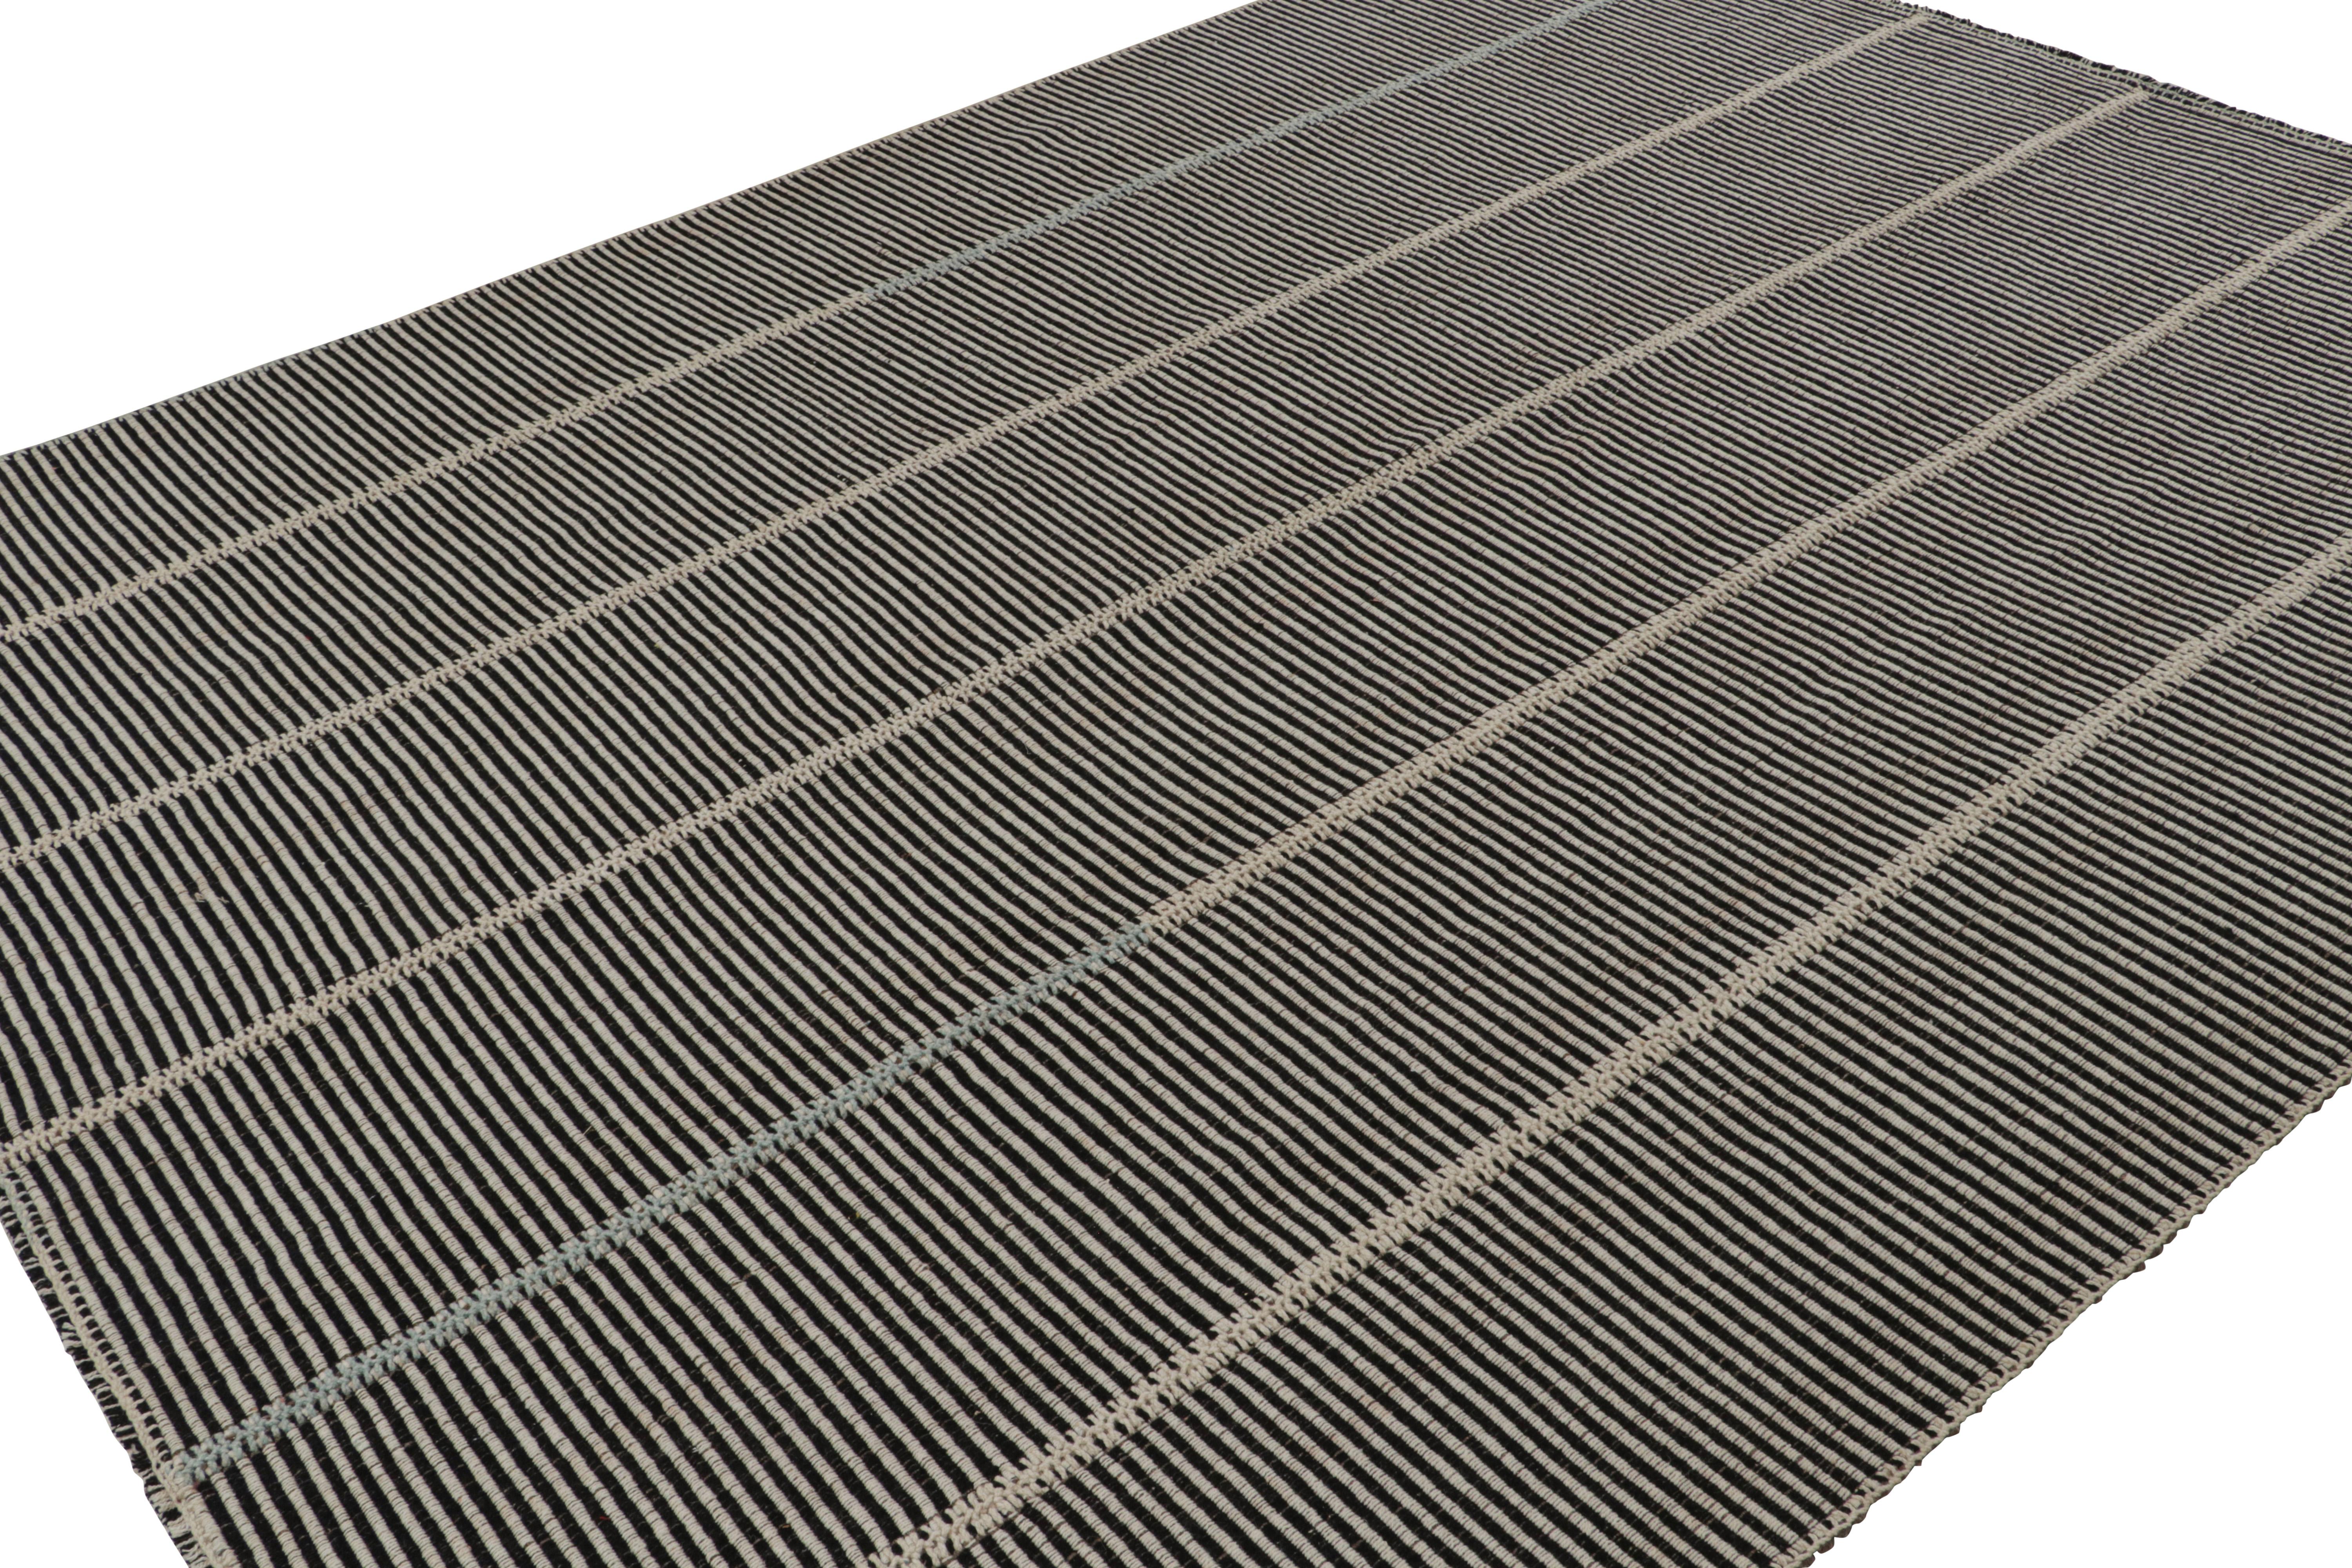 Handwoven in wool, a 9x12 Kilim in Brown with Beige and Blue  accents, from a bold new line of contemporary flatweaves, ‘Rez Kilim’, by Rug & Kilim.

On the Design: 

Connoting a modern take on classic panel-weaving, our latest “Rez Kilim” enjoys